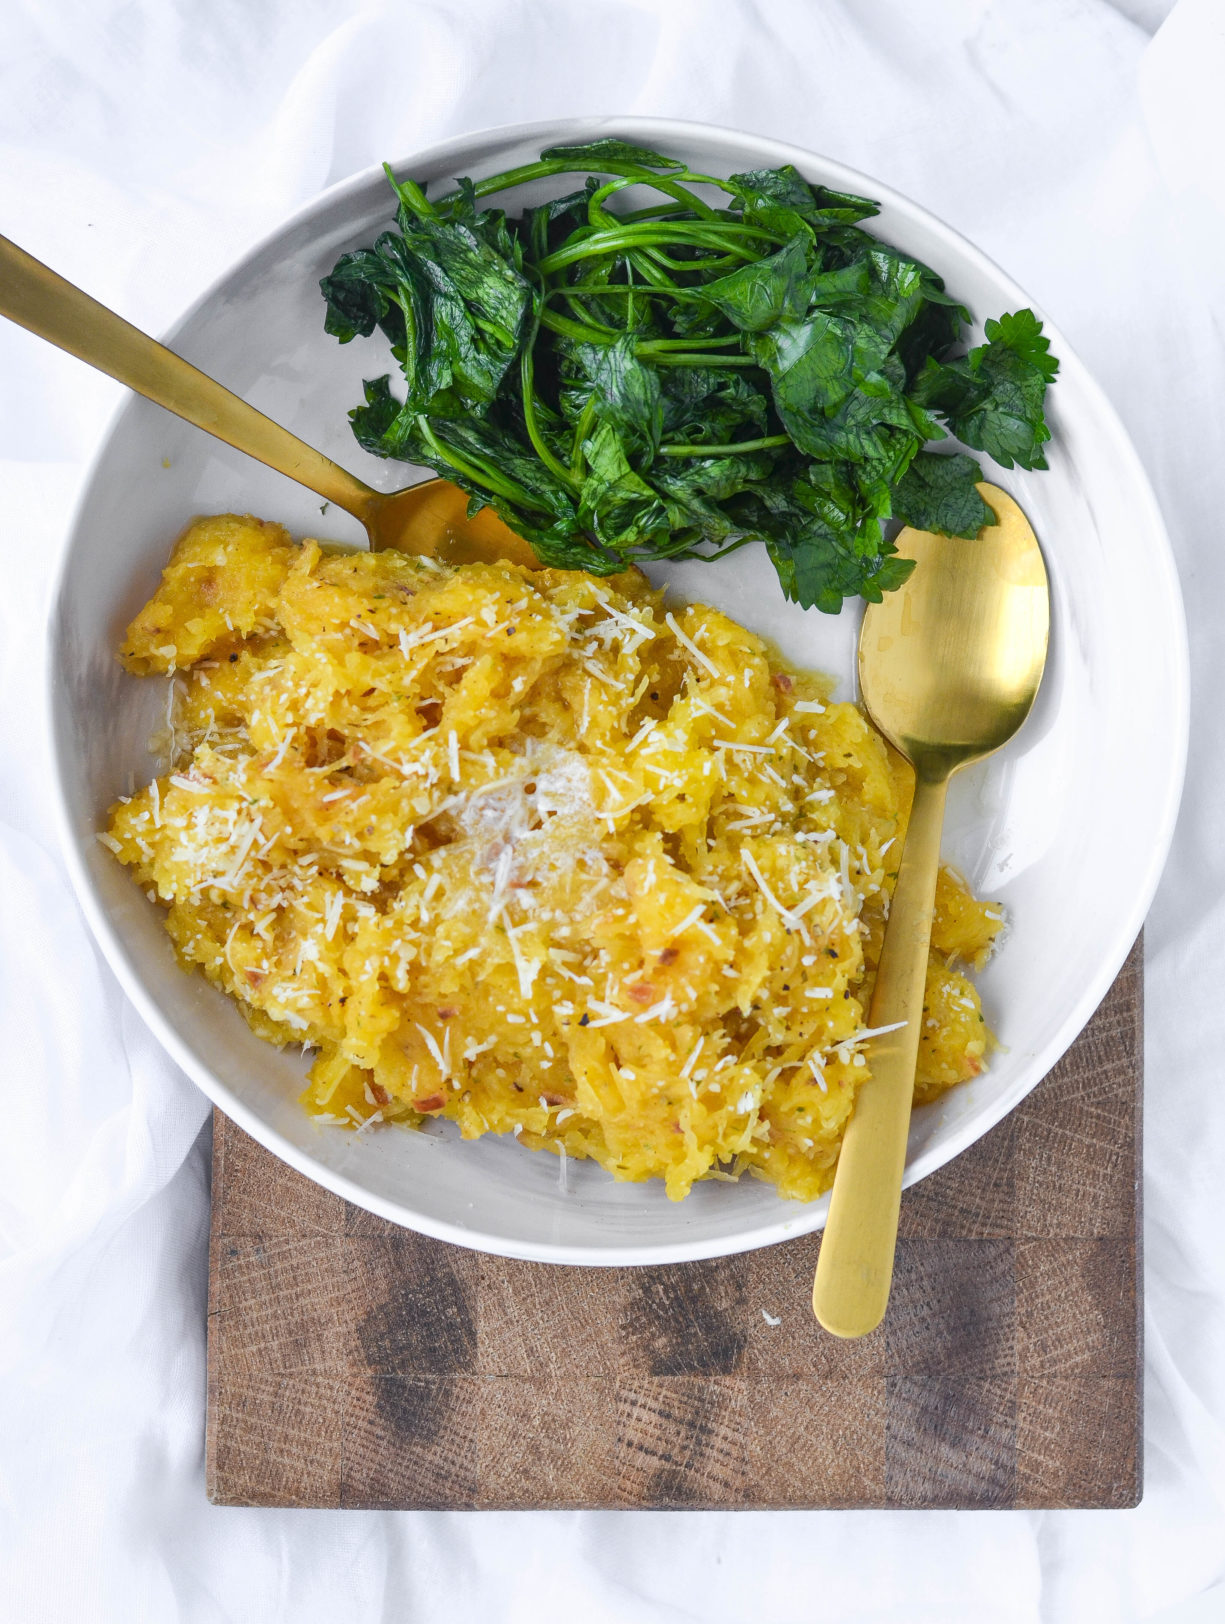 Slow-Cooker-Garlic-Parmesan-Spaghetti-Squash-Just-Add-Glam | HEALTHY KETO CROCKPOT RECIPES TO EASE YOU INTO THE NEW YEAR by popular San Francisco life and style blog, Just Add Glam: image of slow cooker garlic parmesan spaghetti squash.  